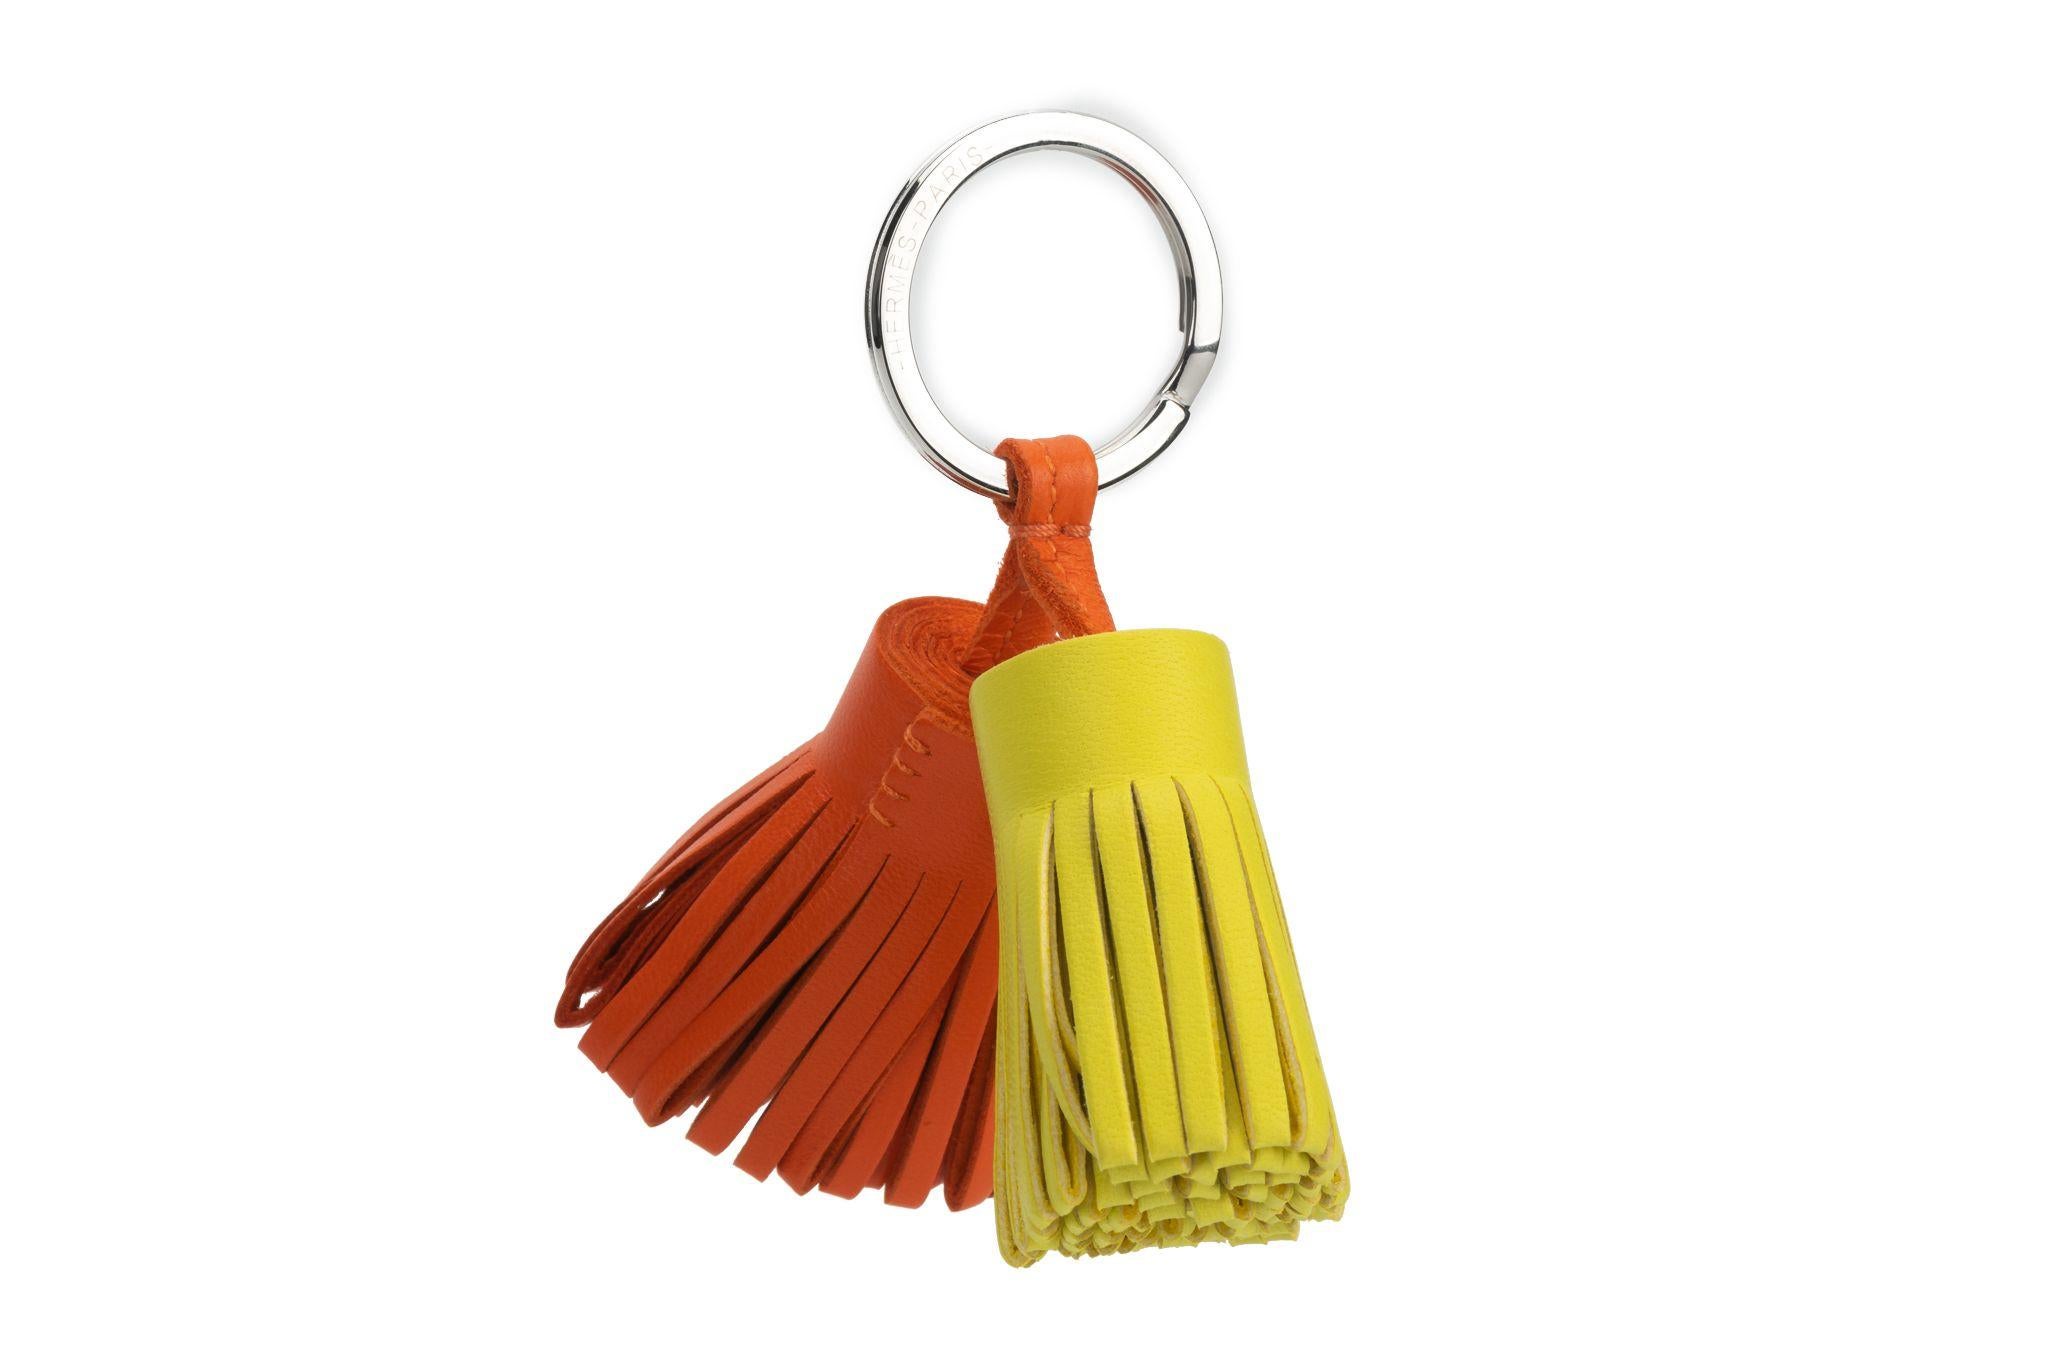 Hermès new double carmen keychain, lime and feu leather pom pom and palladium hardware. Comes with original box.